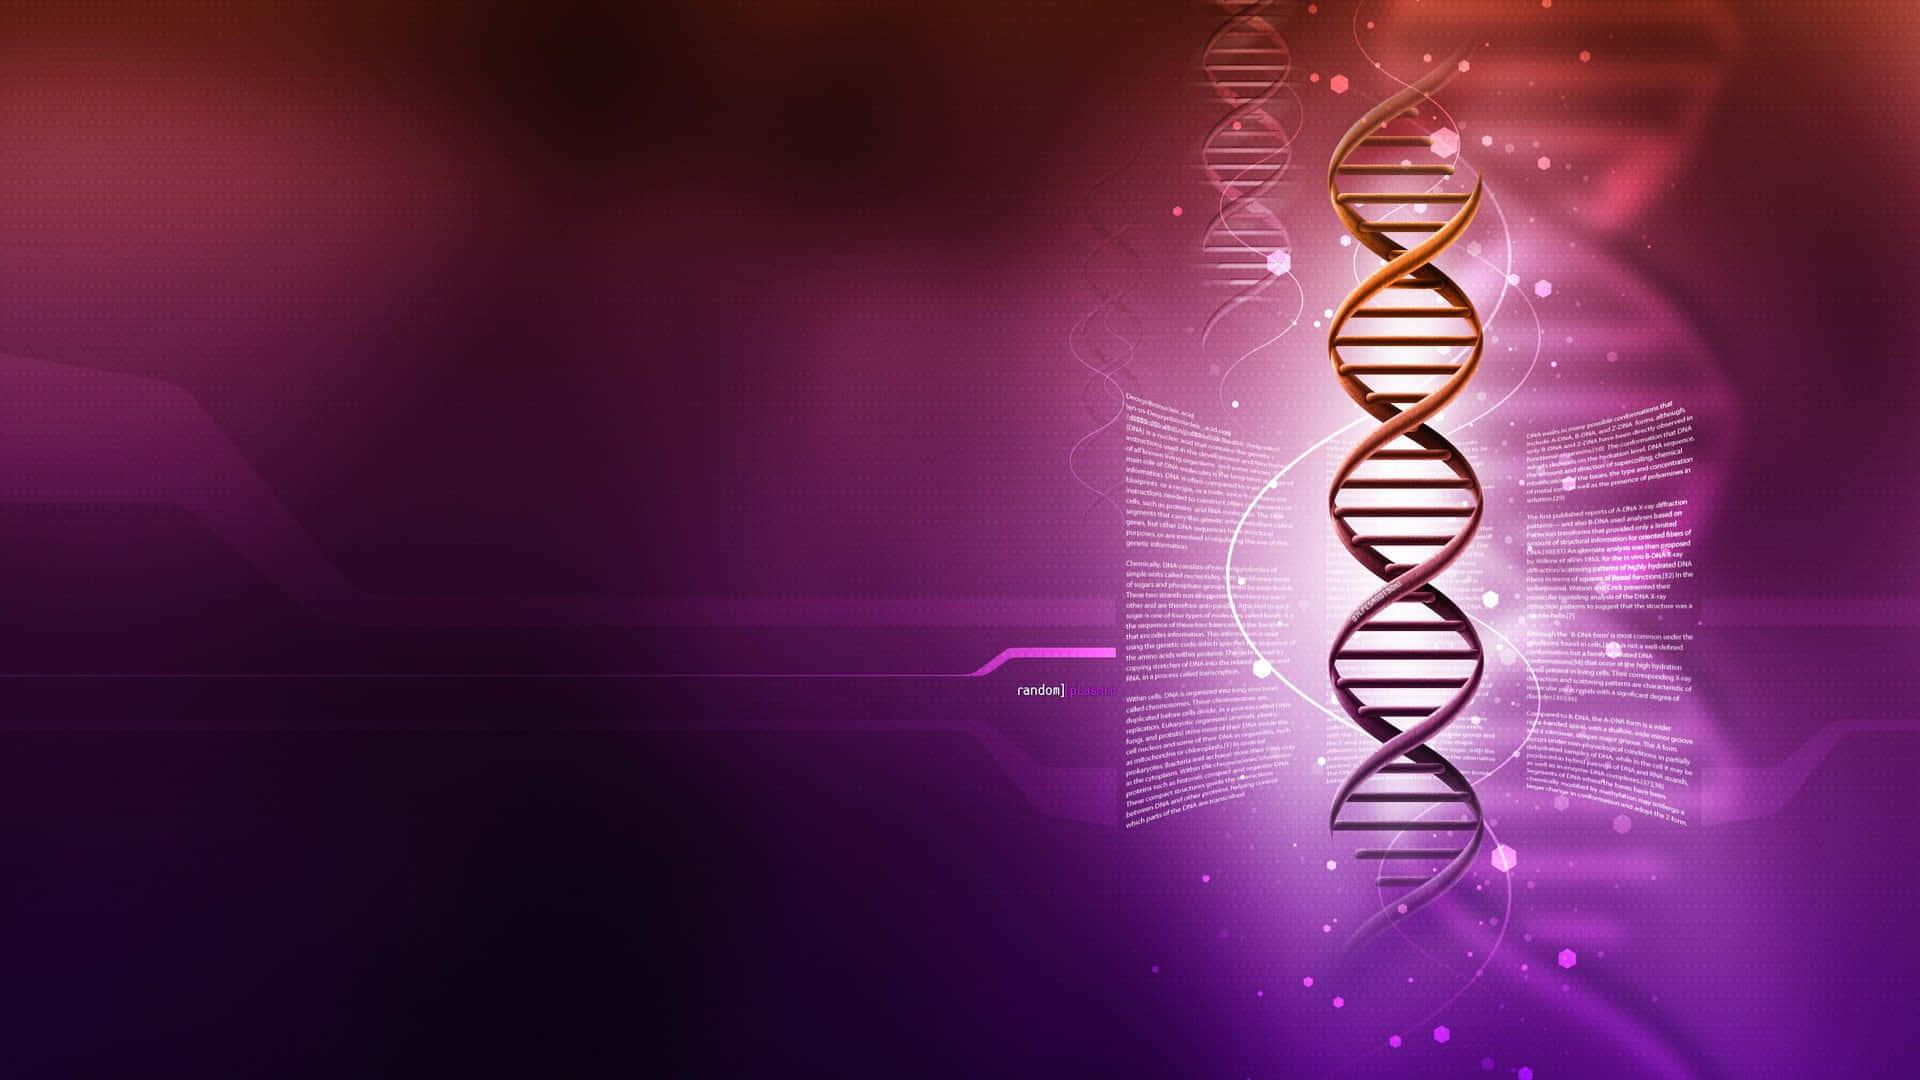 Exploring the Mystery of Our Origins with DNA